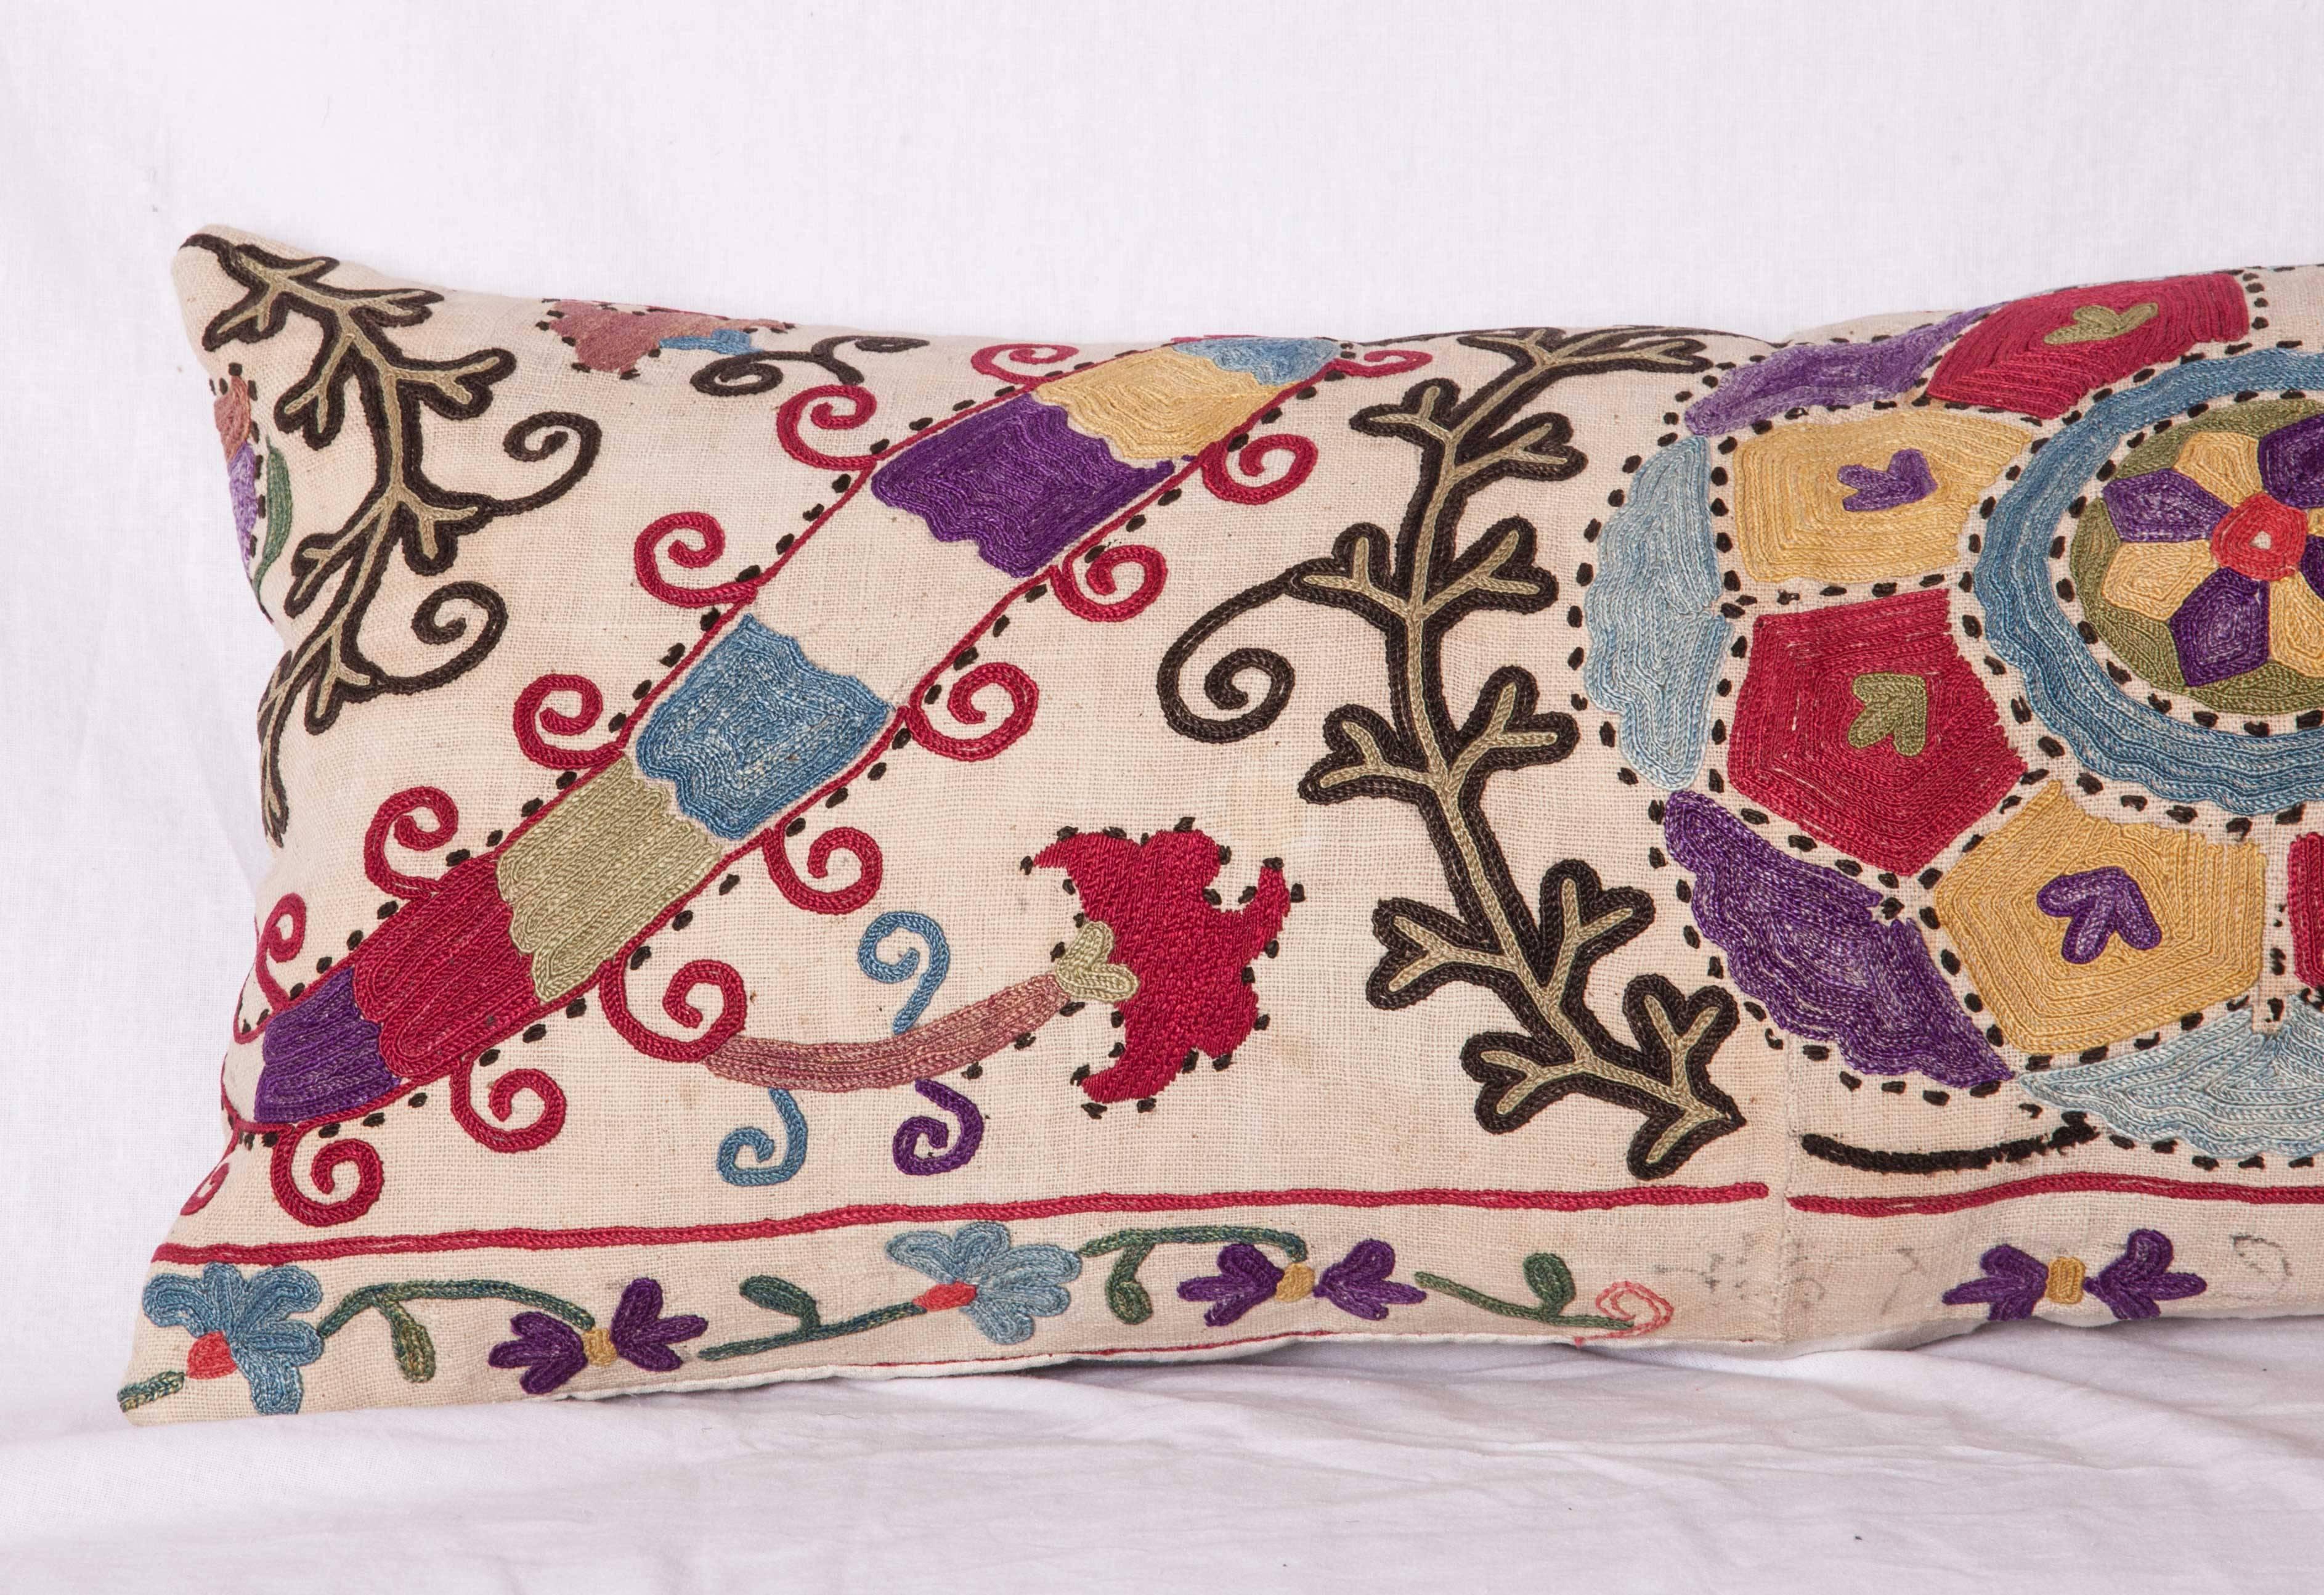 Embroidered Antique Pillow Made Out of a Late19th Century, Uzbek Bukhara Suzani